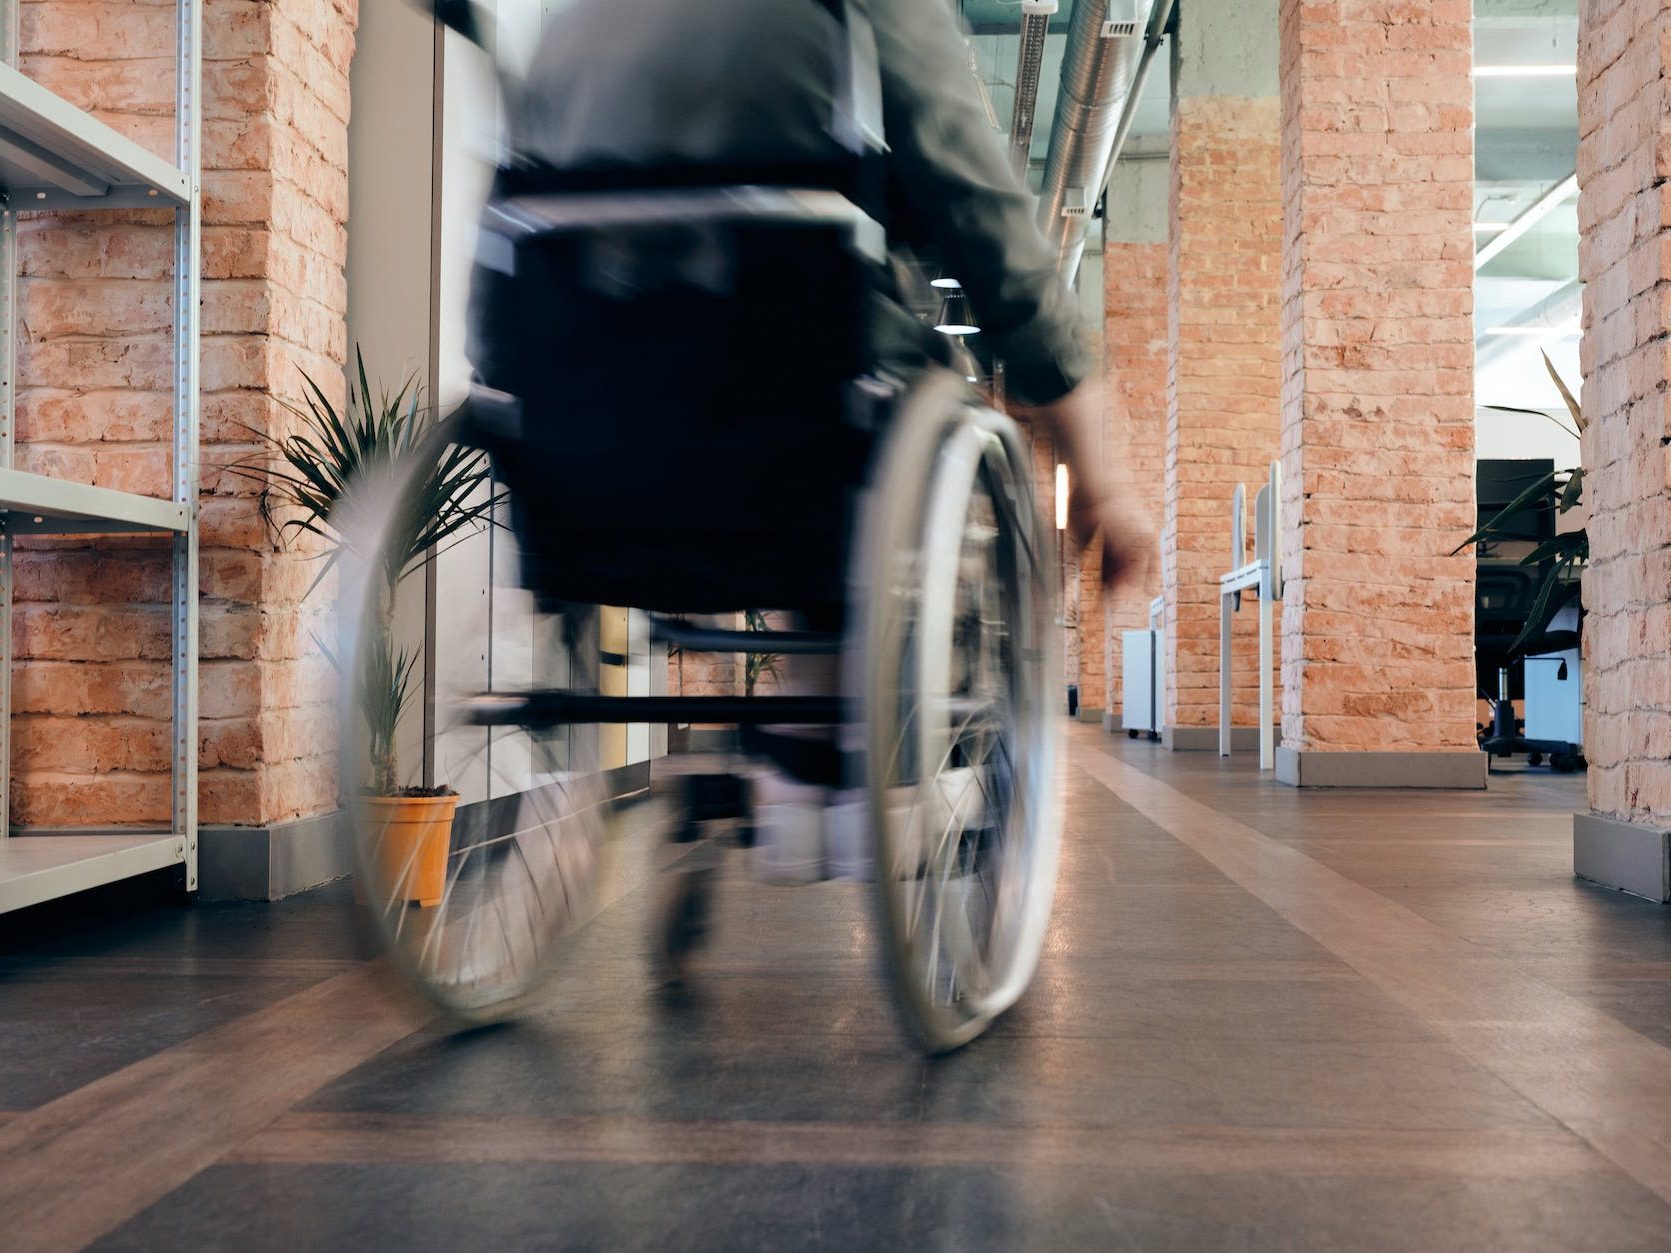 photo of person using wheelchair